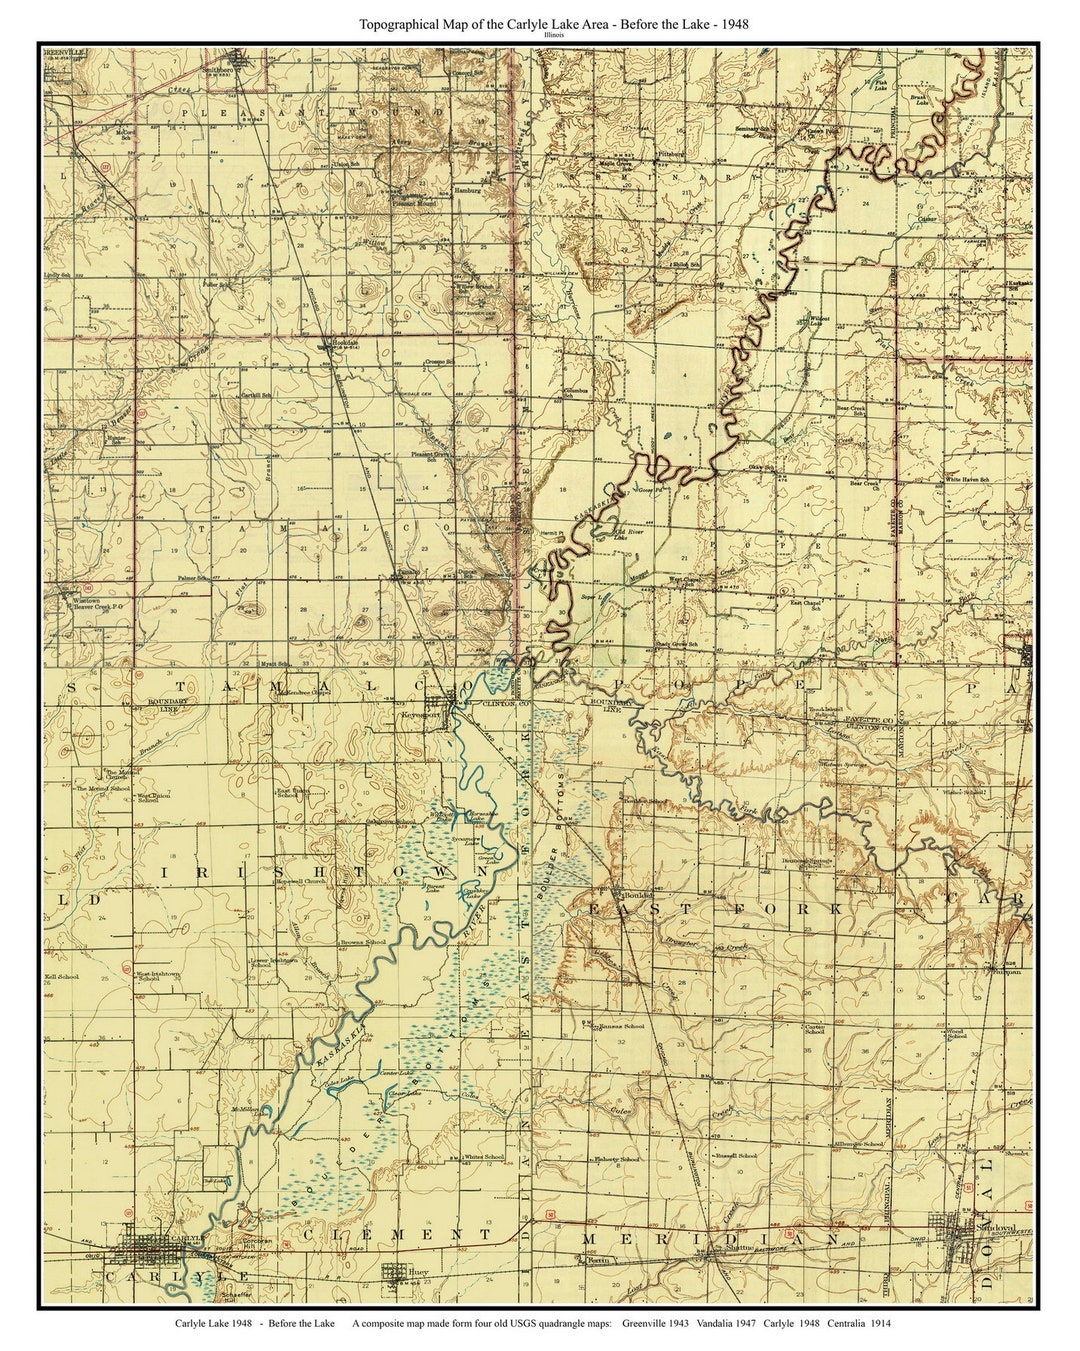 Carlyle Lake before the Lake 1948 USGS Old Topographic